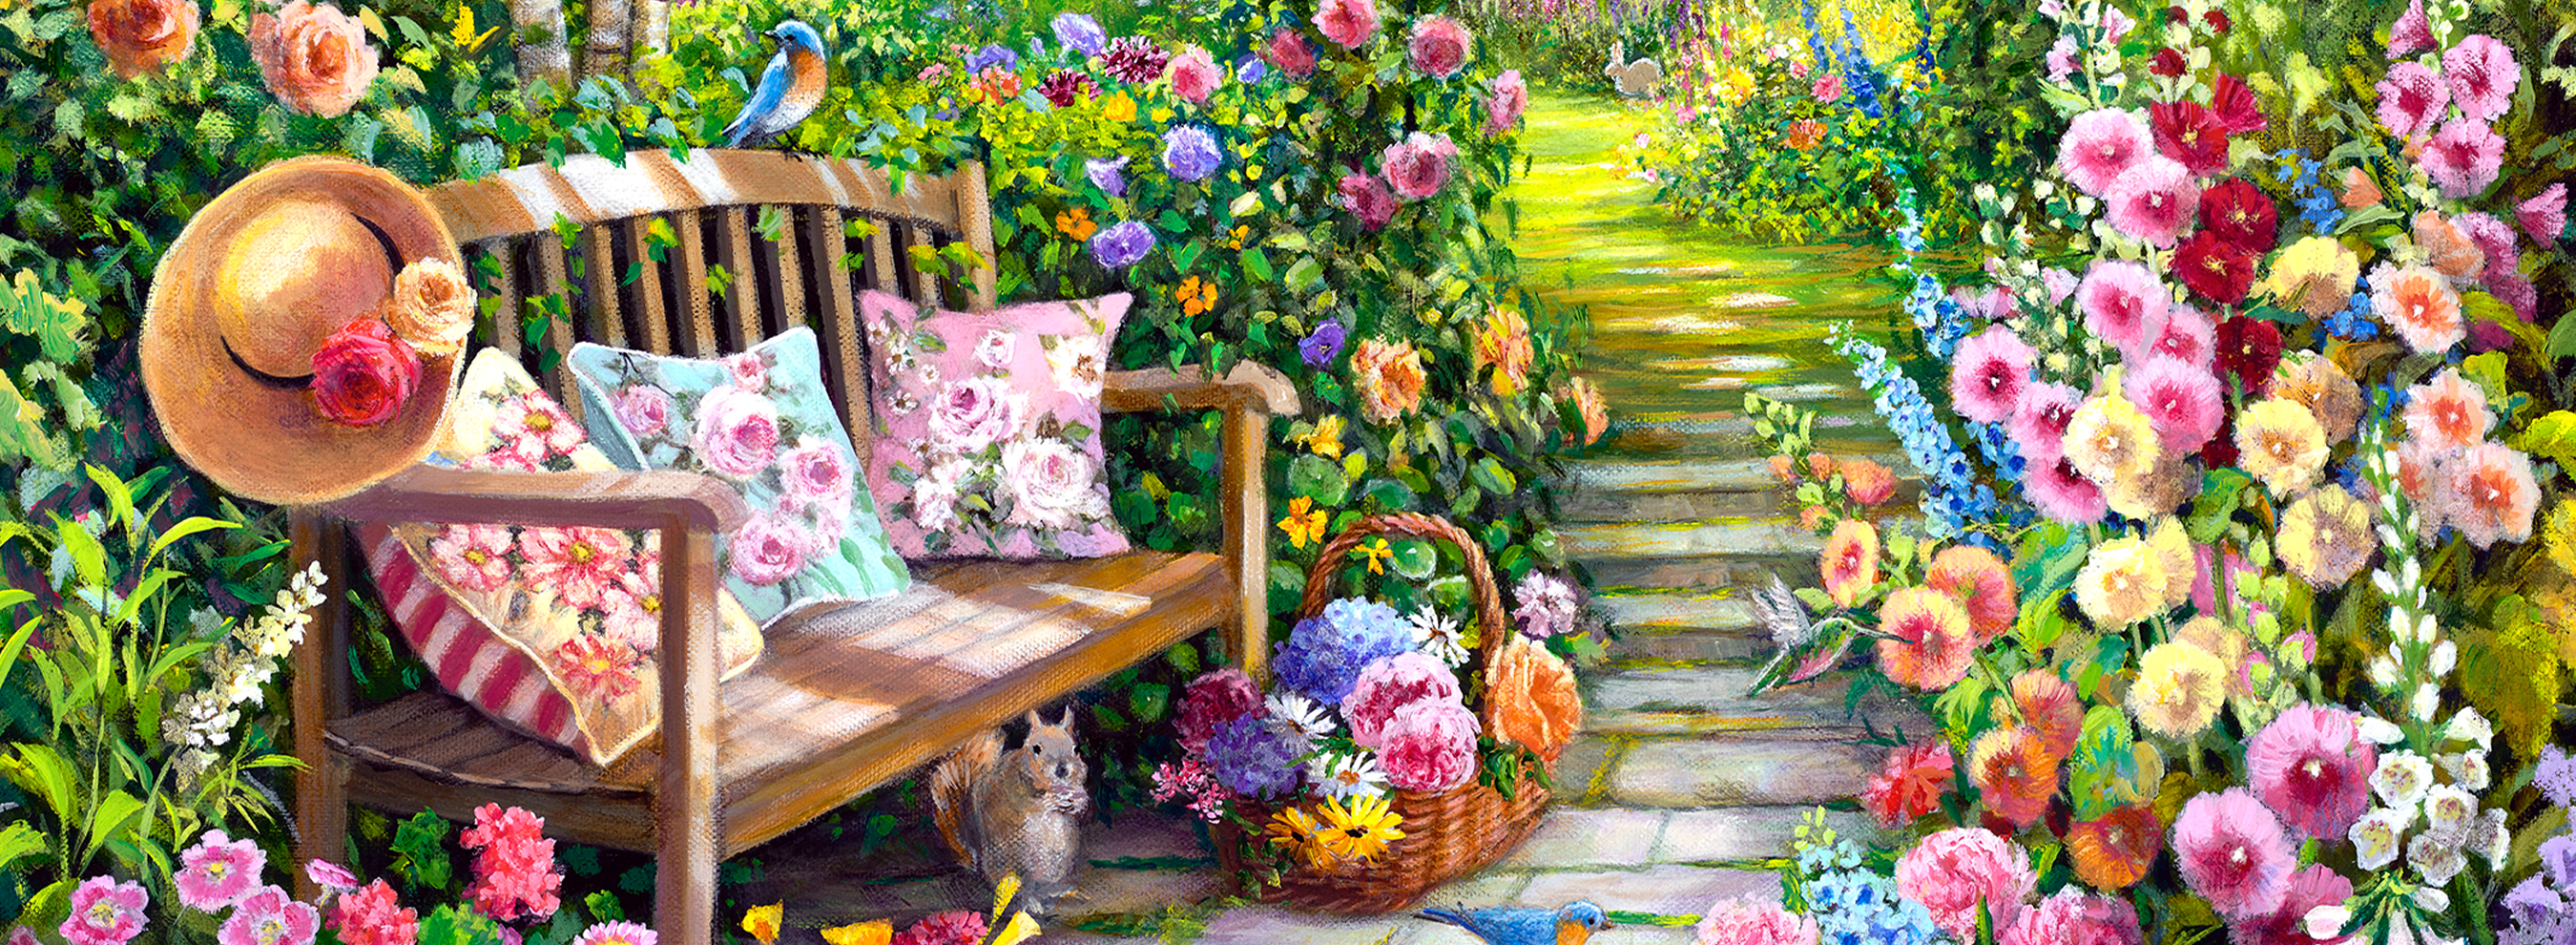 Wooden floral gardens jigsaw puzzle featuring floral gardens surrounding a wooden bench, a squirrel under the bench, and a basket of flowers.